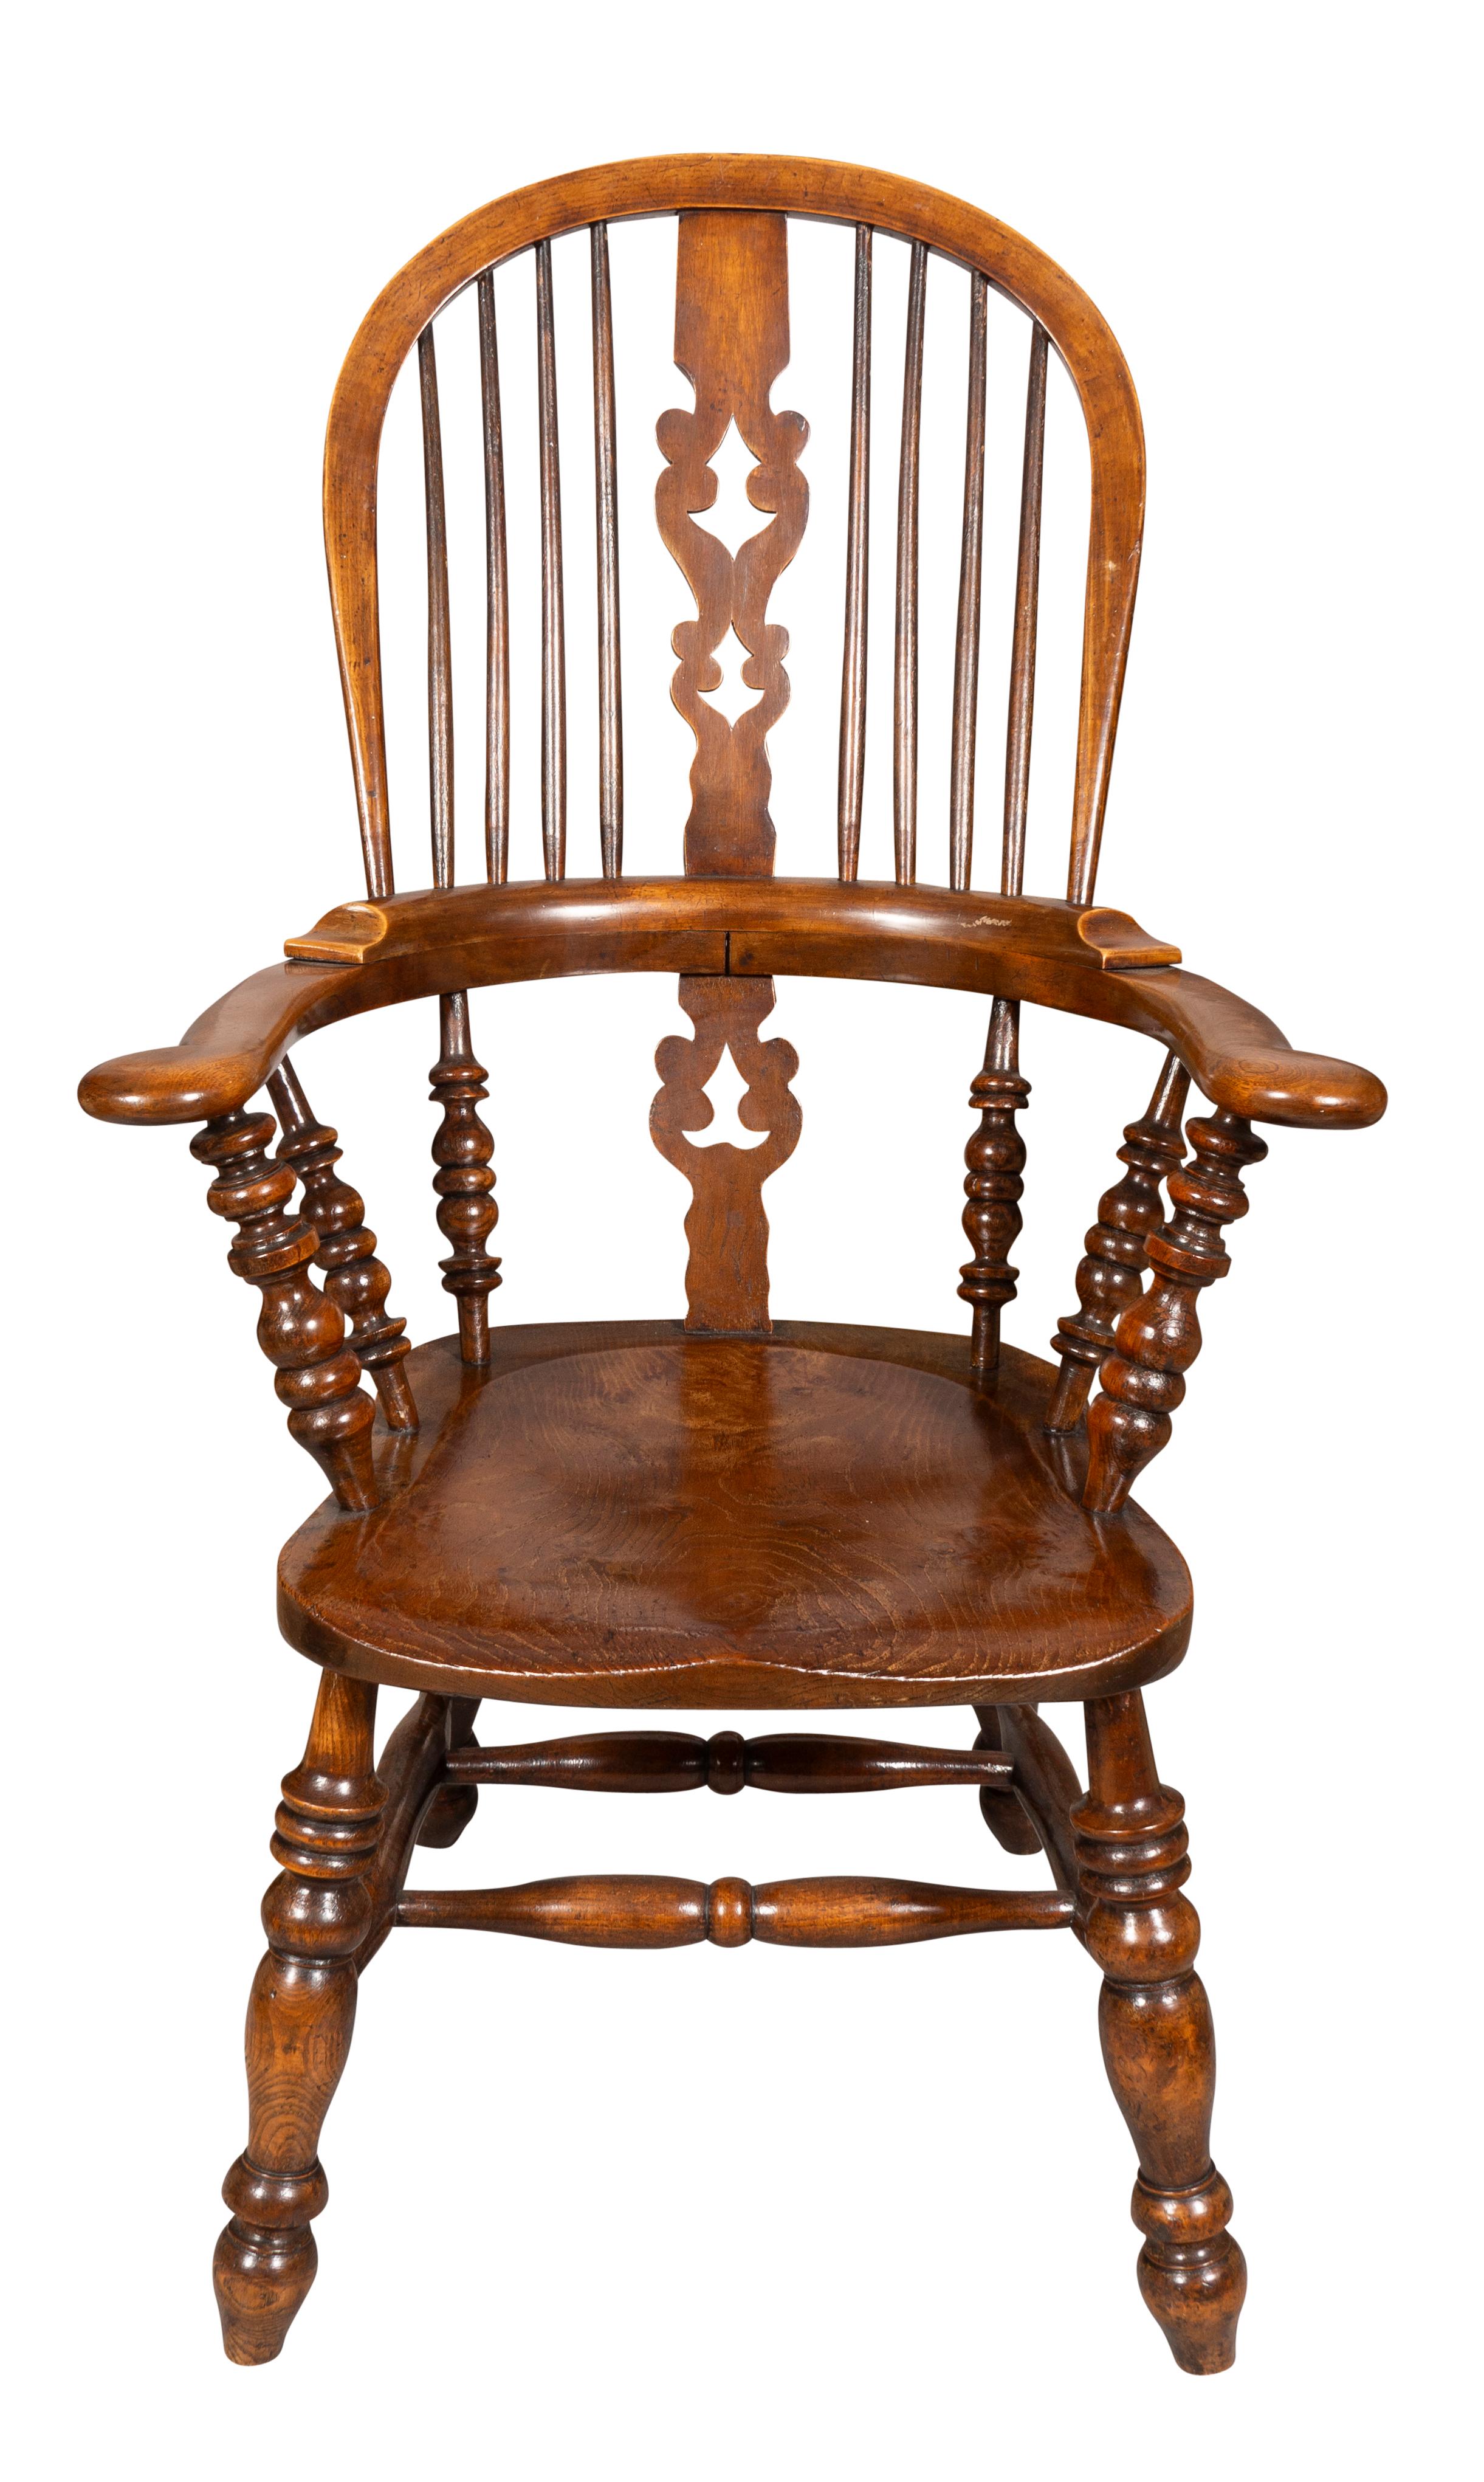 Each with arched backs with splats with tree design cutout flanking spindles , saddle seat and arms with scrolled out terminals, turned legs with turned stretchers. With cushions that are used with some stains.